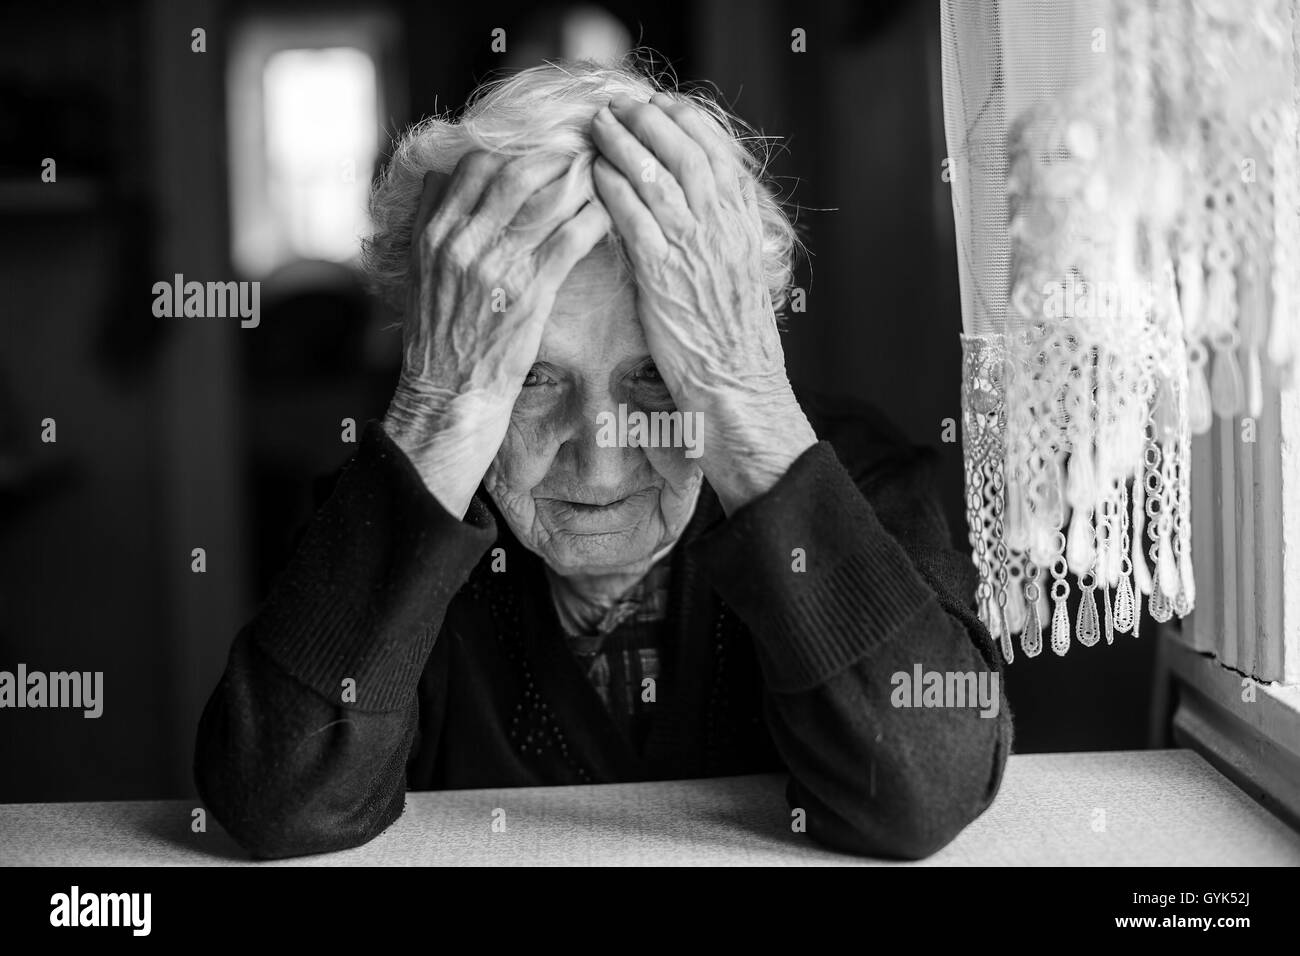 An elderly woman sitting at the table in a depressed state, black and white photo. Stock Photo